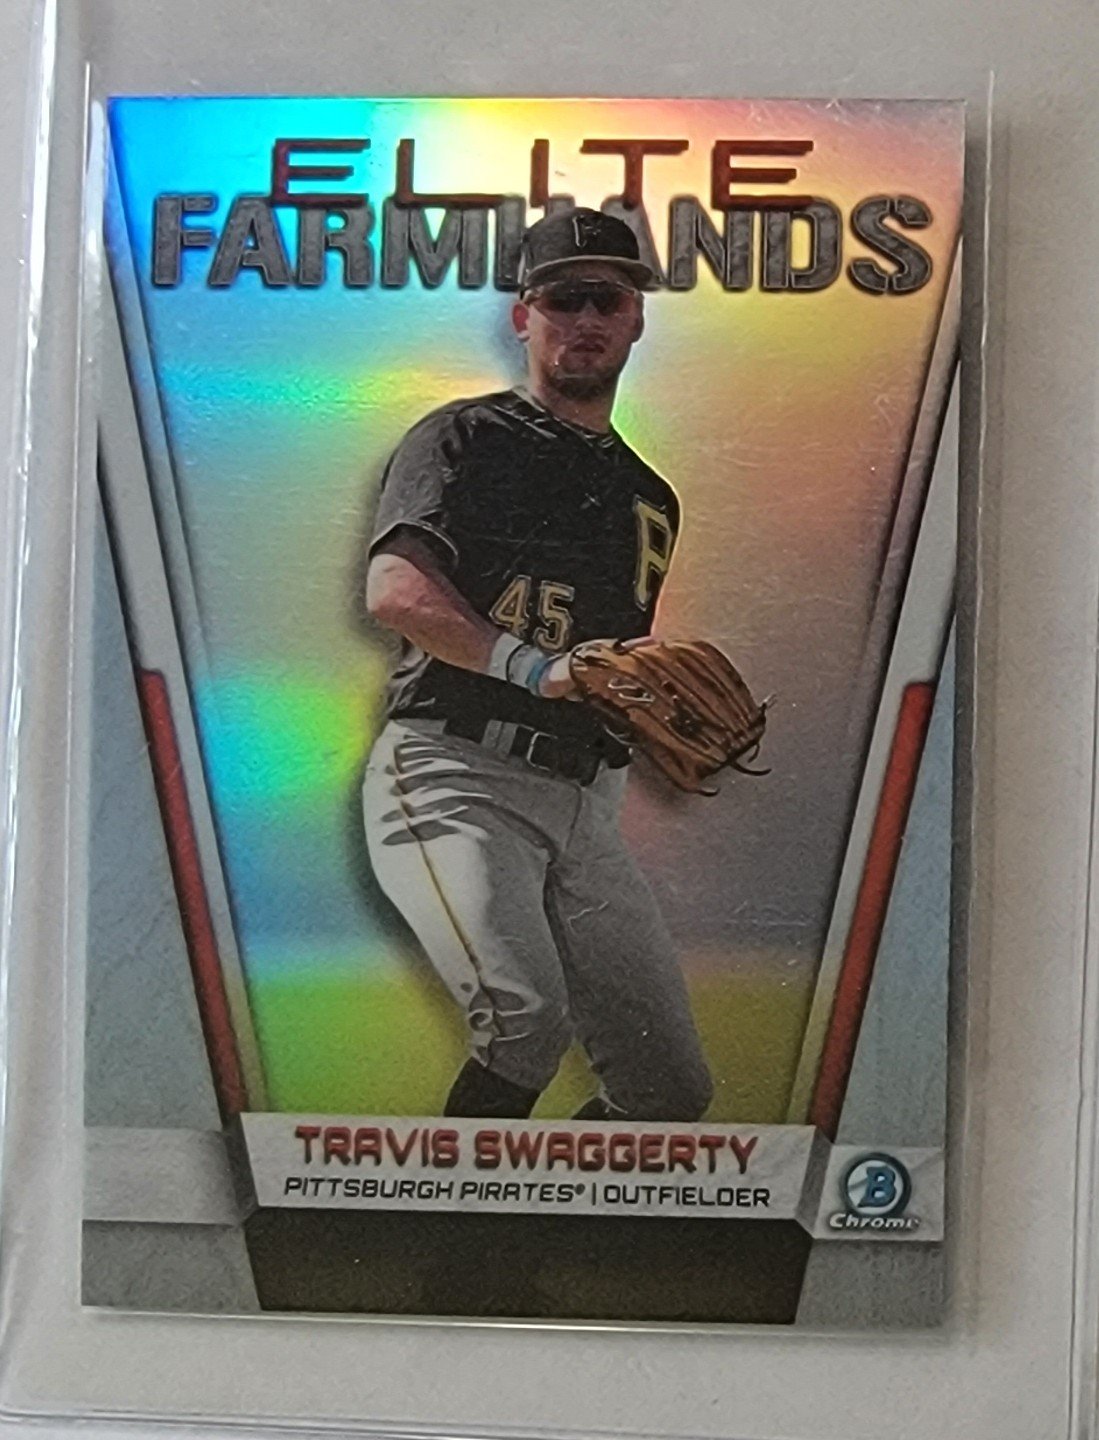 2019 Bowman Chrome Travis Swaggerty Elite Farmhands Refractor Baseball Card TPTV simple Xclusive Collectibles   